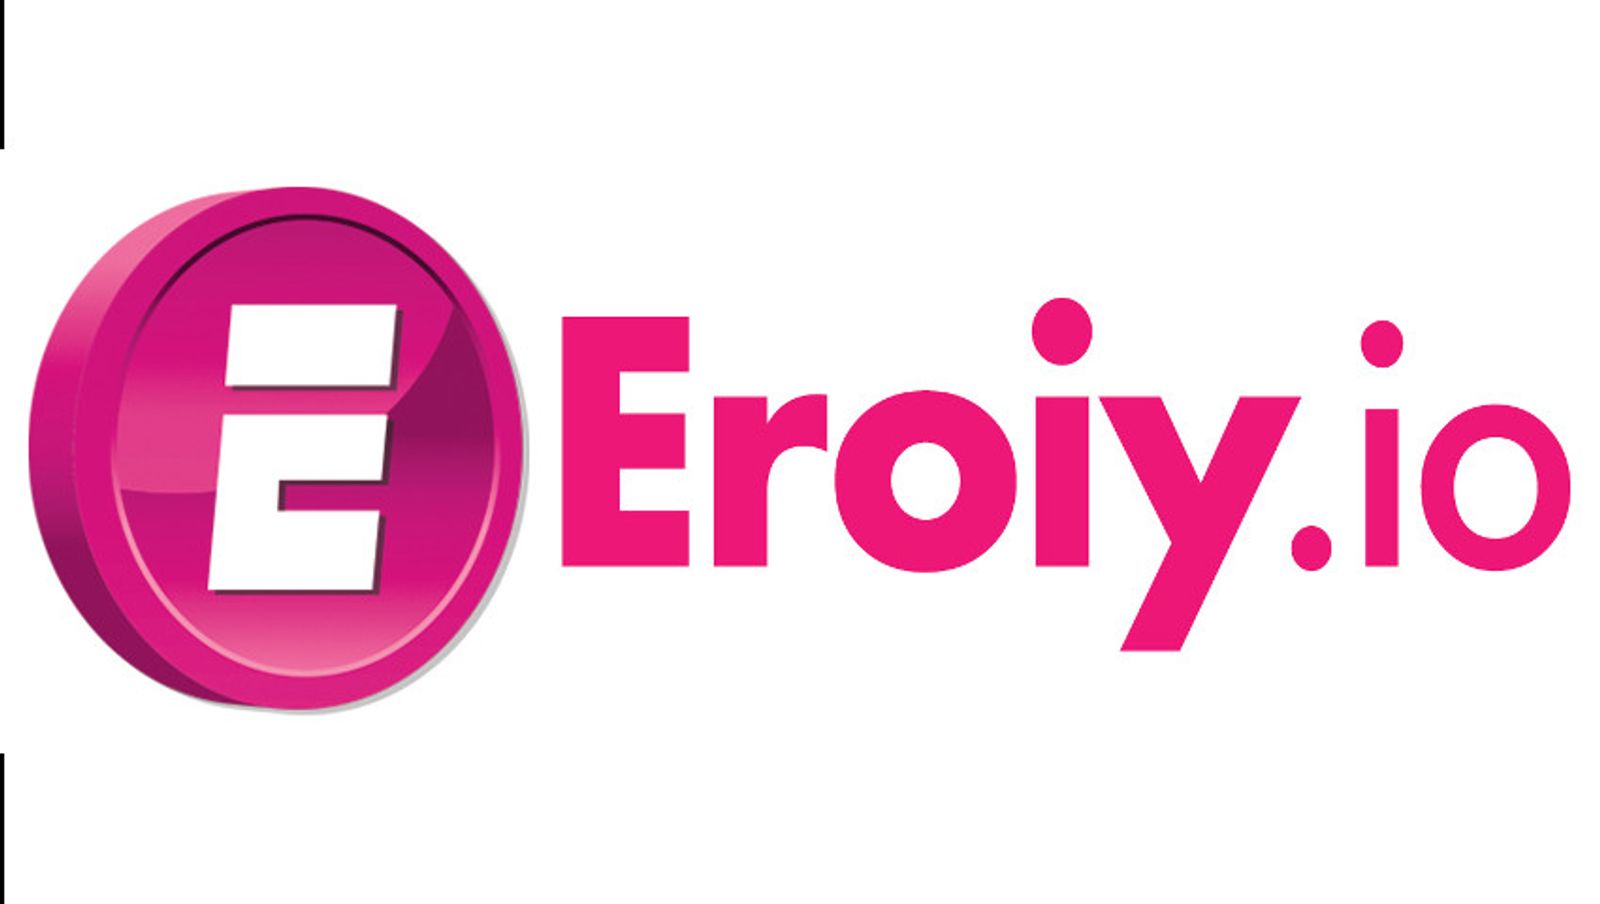 Eroiy Cryptocurrency Reports Growth Ahead of ICO